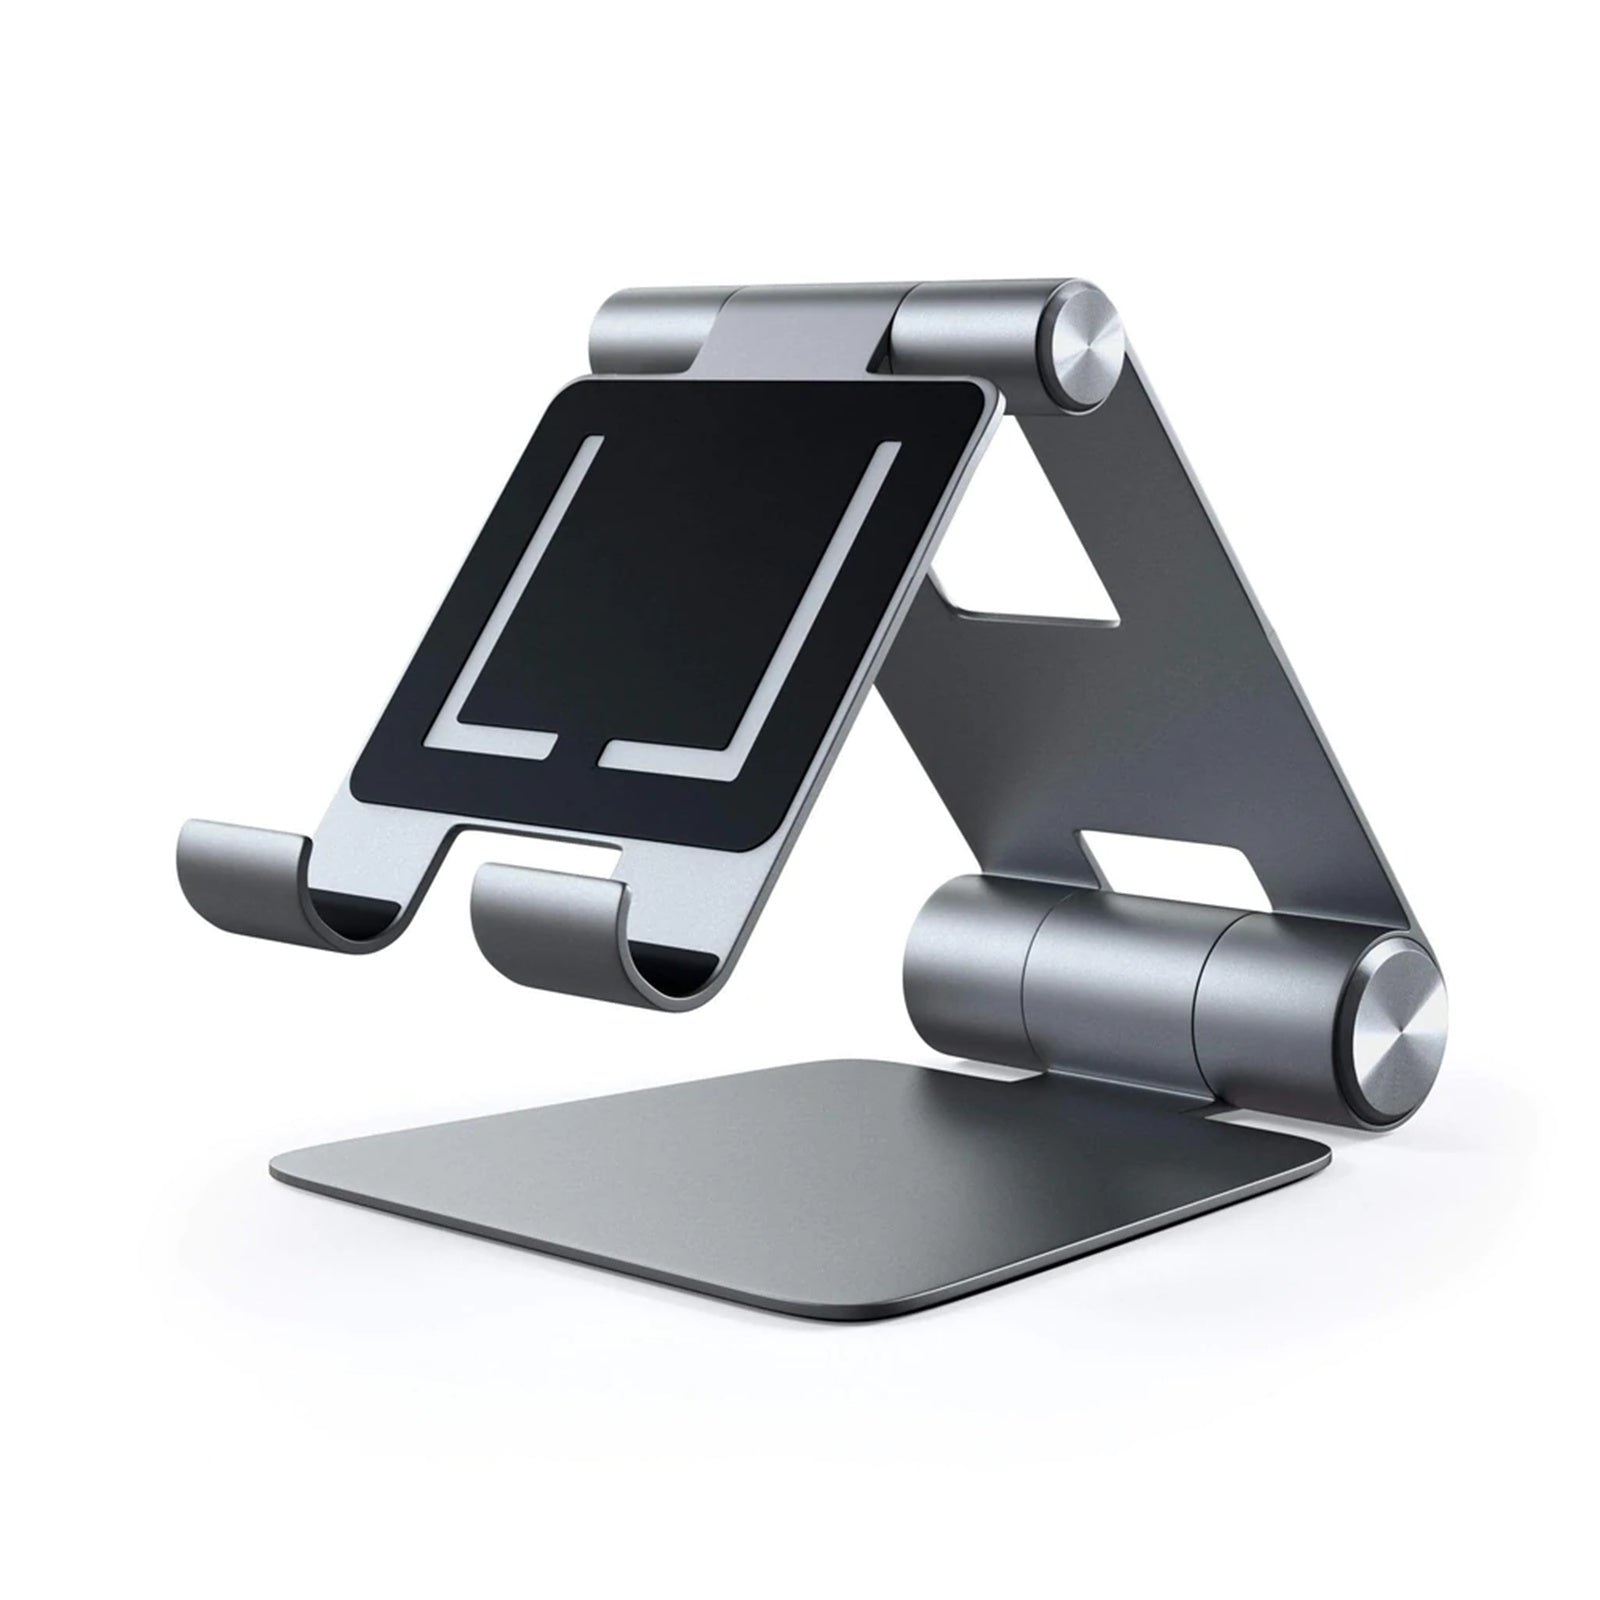 Satechi R1 Adjustable Mobile Stand Space Gray - iShop